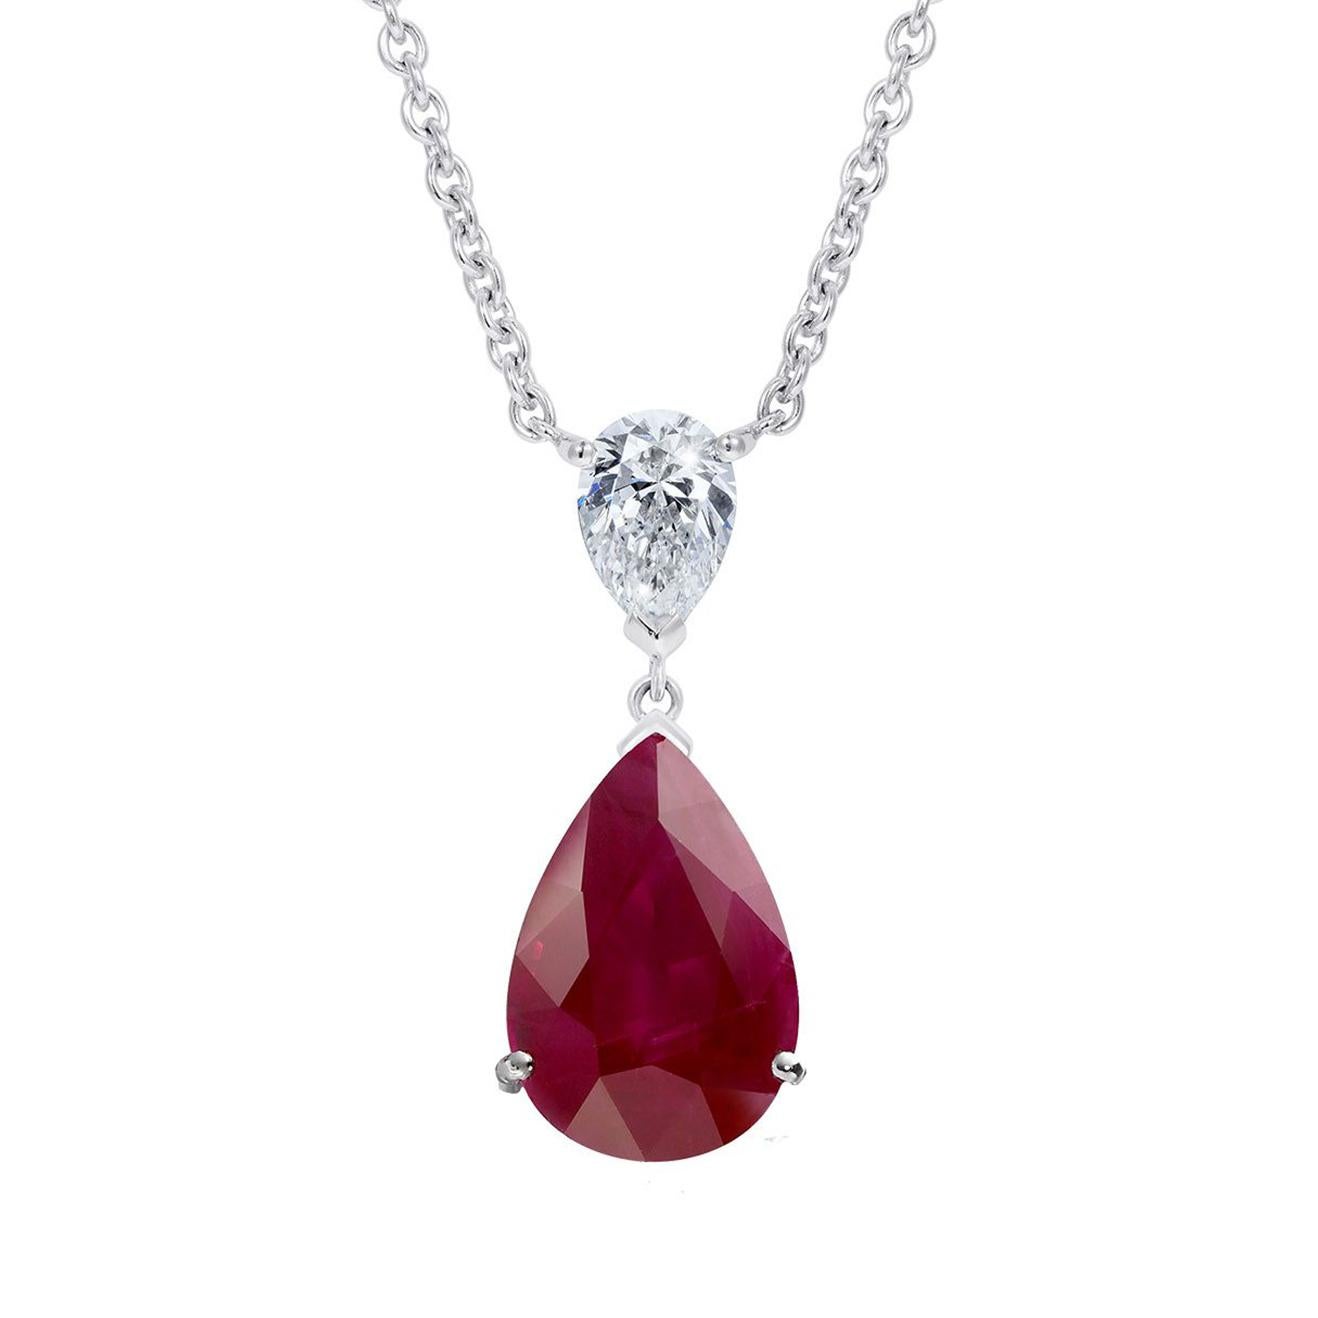 A pear shape ruby set below a pear shape diamond in the Hirsh Wallace setting.

- 1.25 carat pear shape ruby
- 0.28 carat pear shape diamond
- Handmade in platinum in our Mayfair atelier

Formed deep within the earth and found on every continent,